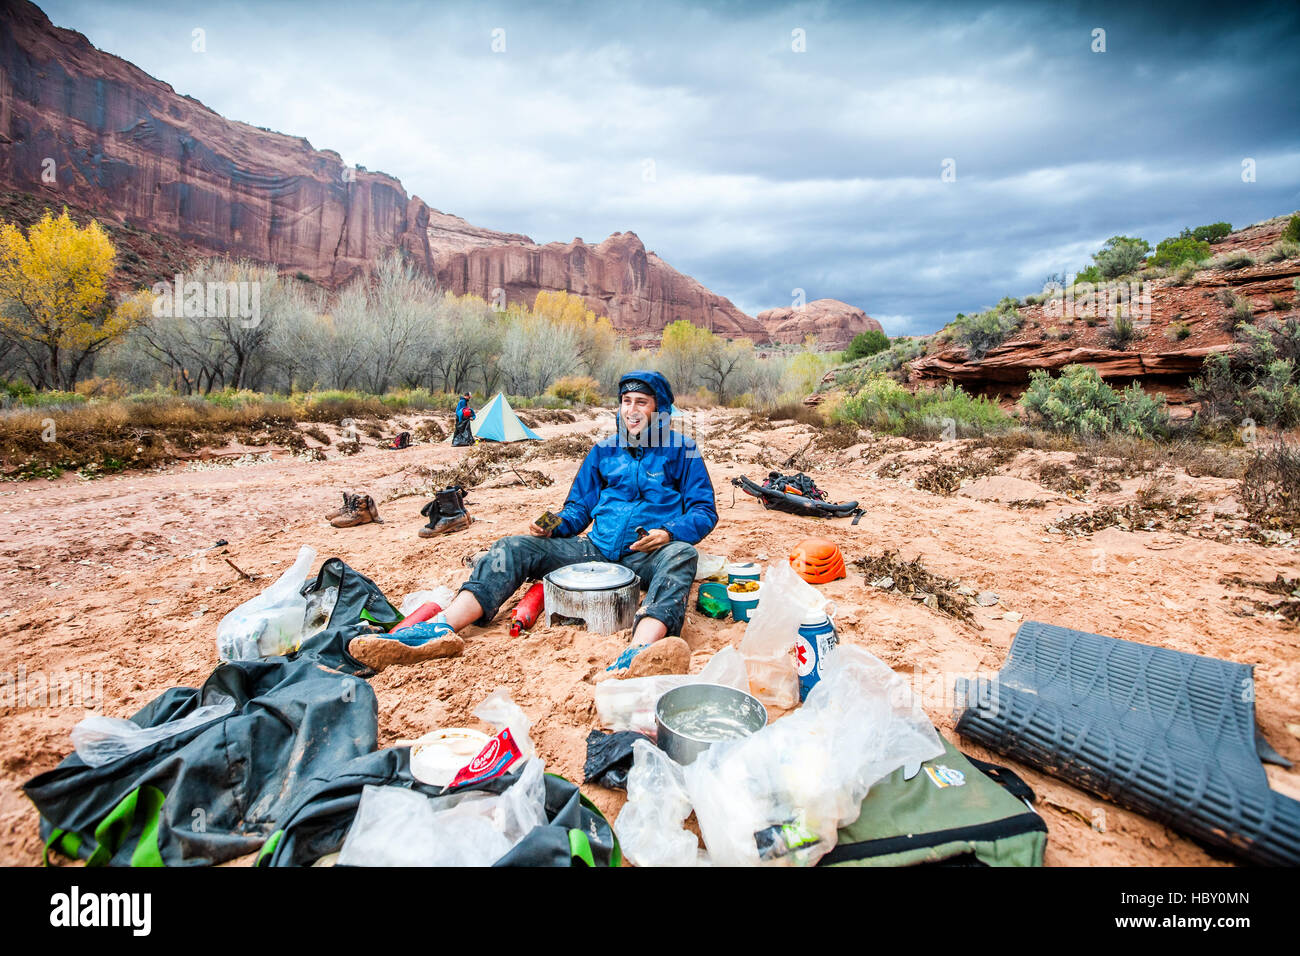 A young man camping in a dry wash, cooking dinner beneath a thunderstorm in the canyons of Utah Stock Photo